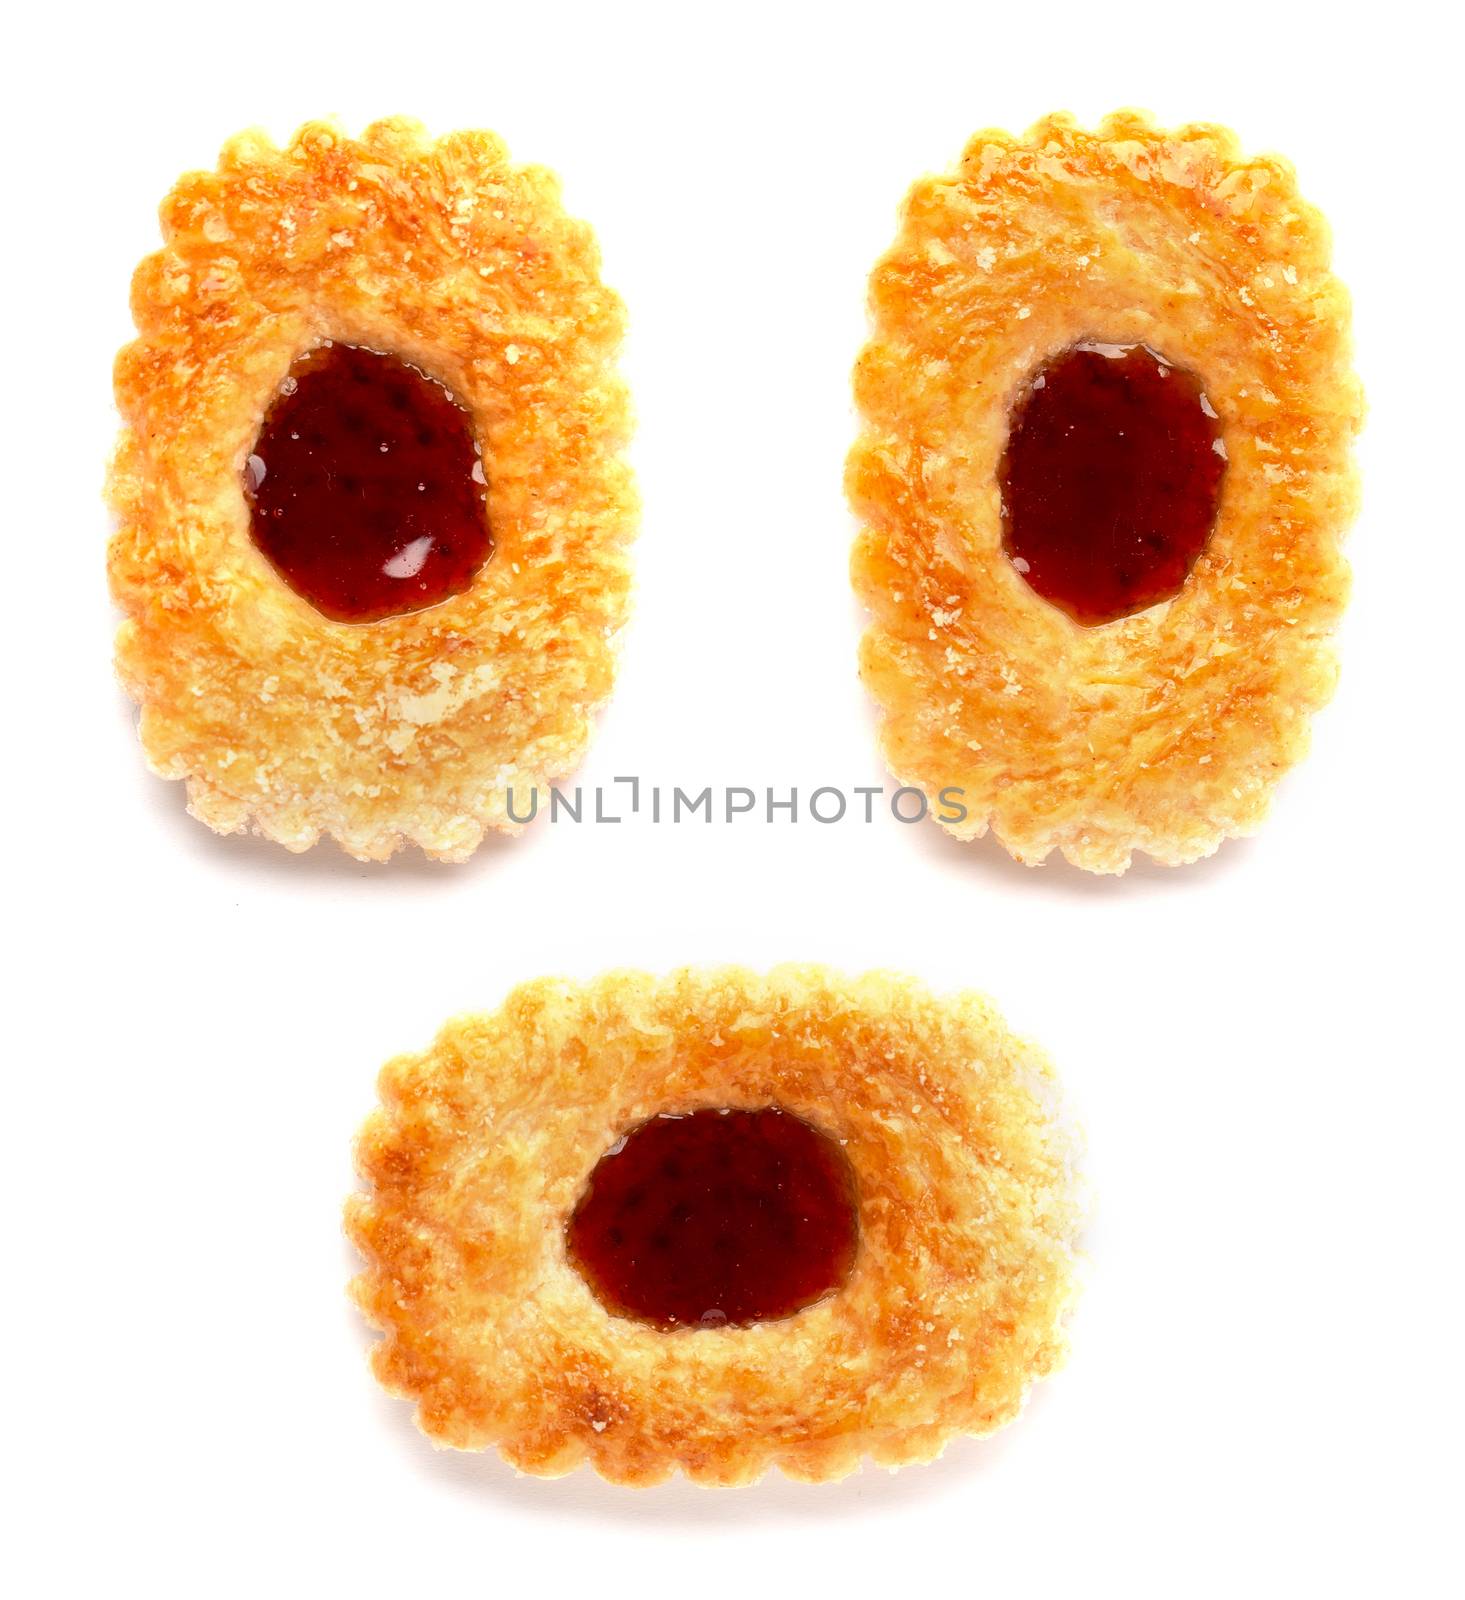 The Three cookies with a blob of jam in the middle on a white background